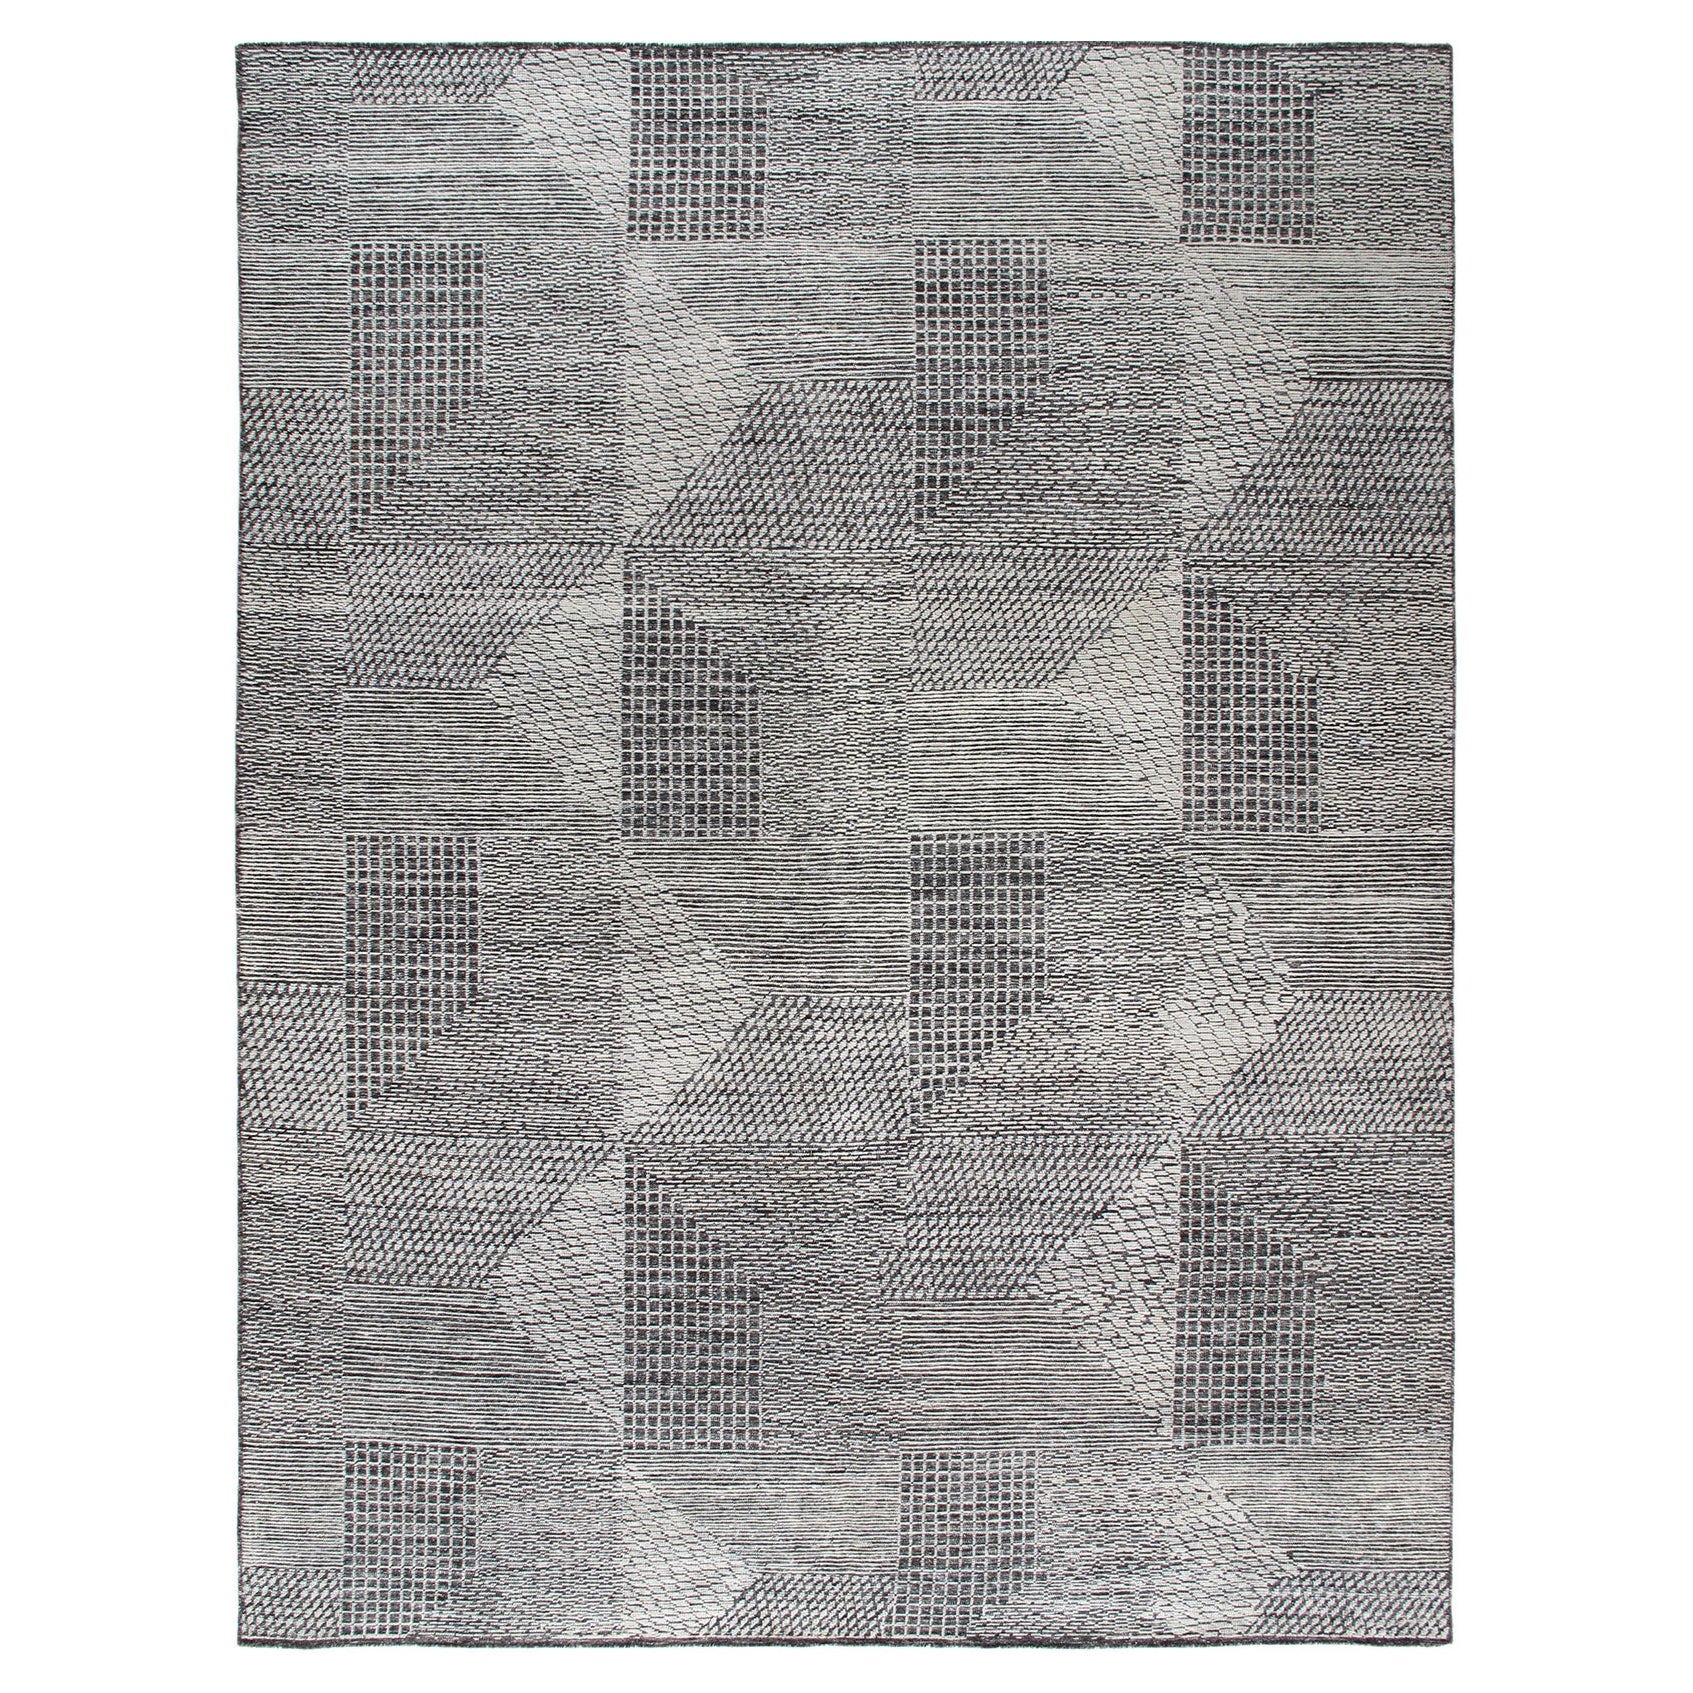 Modern Contemporary Mosaic Geometric Handknotted Rug 